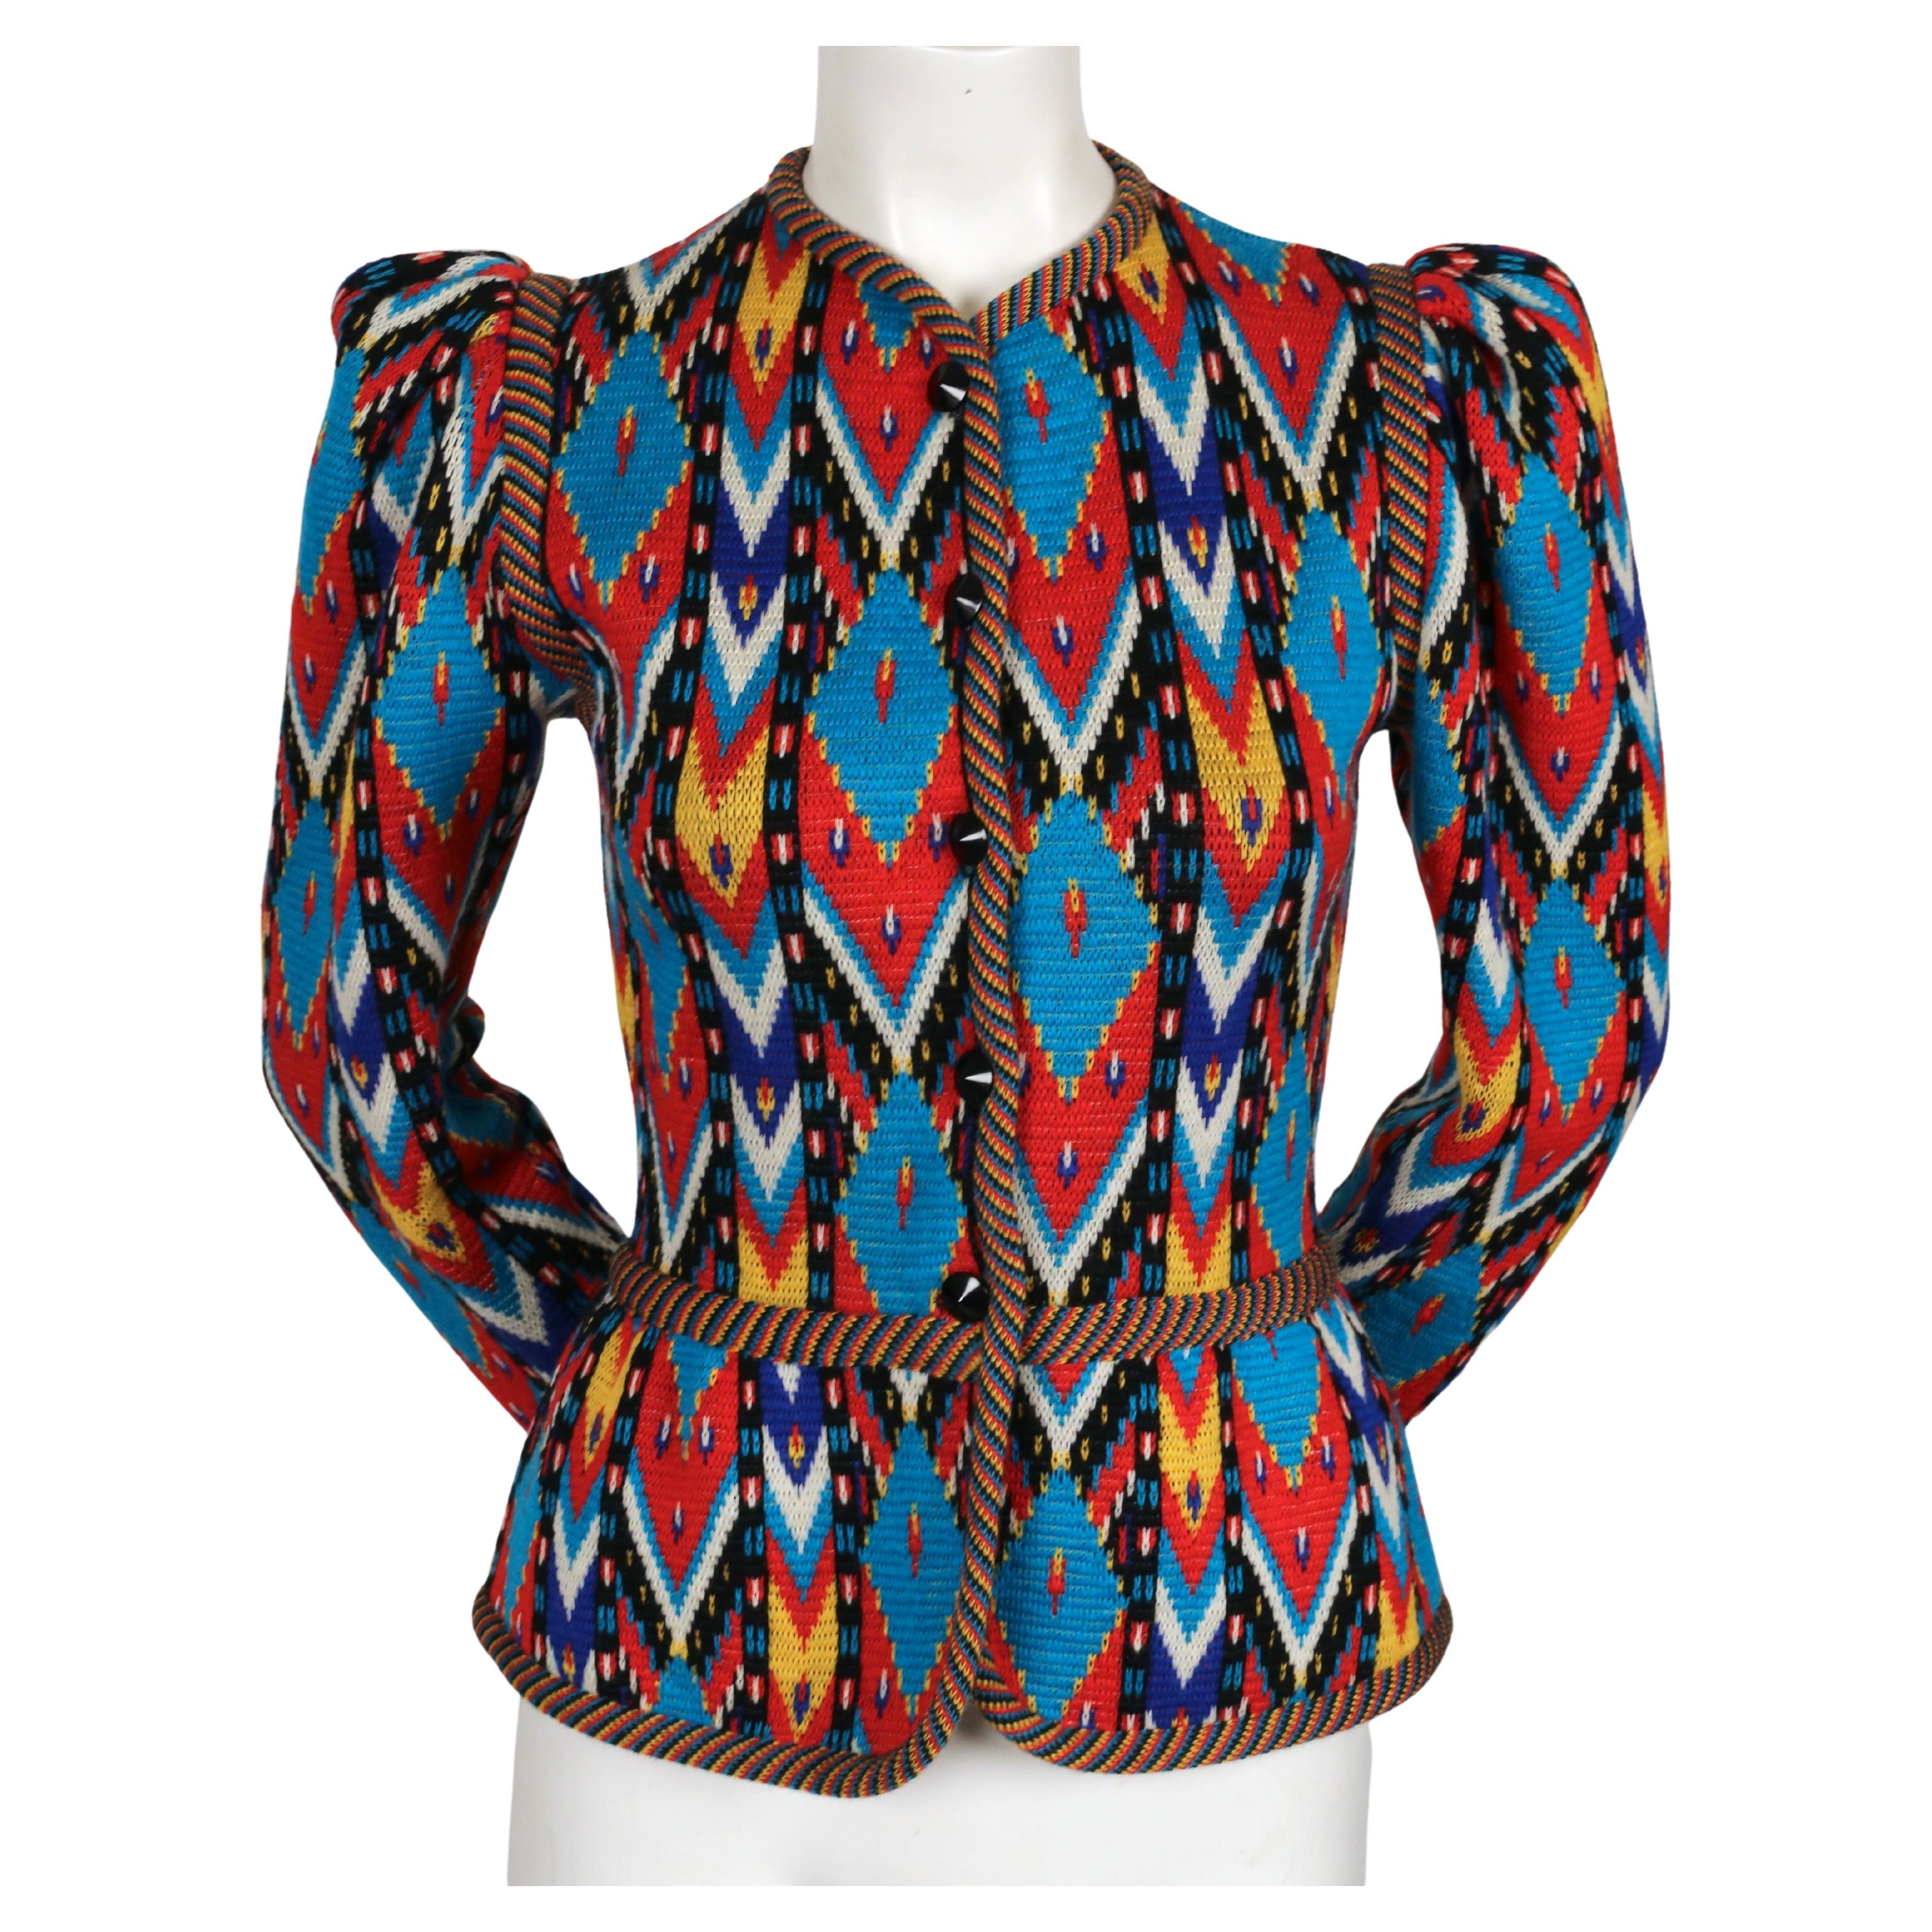 Multi-colored, Ikat patterned, woven wool cardigan with puff sleeves and peplum hem detail designed by Yves Saint Laurent dating to fall of 1979. Labeled a French size 36. Approximate measurements (unstretched): shoulder 14